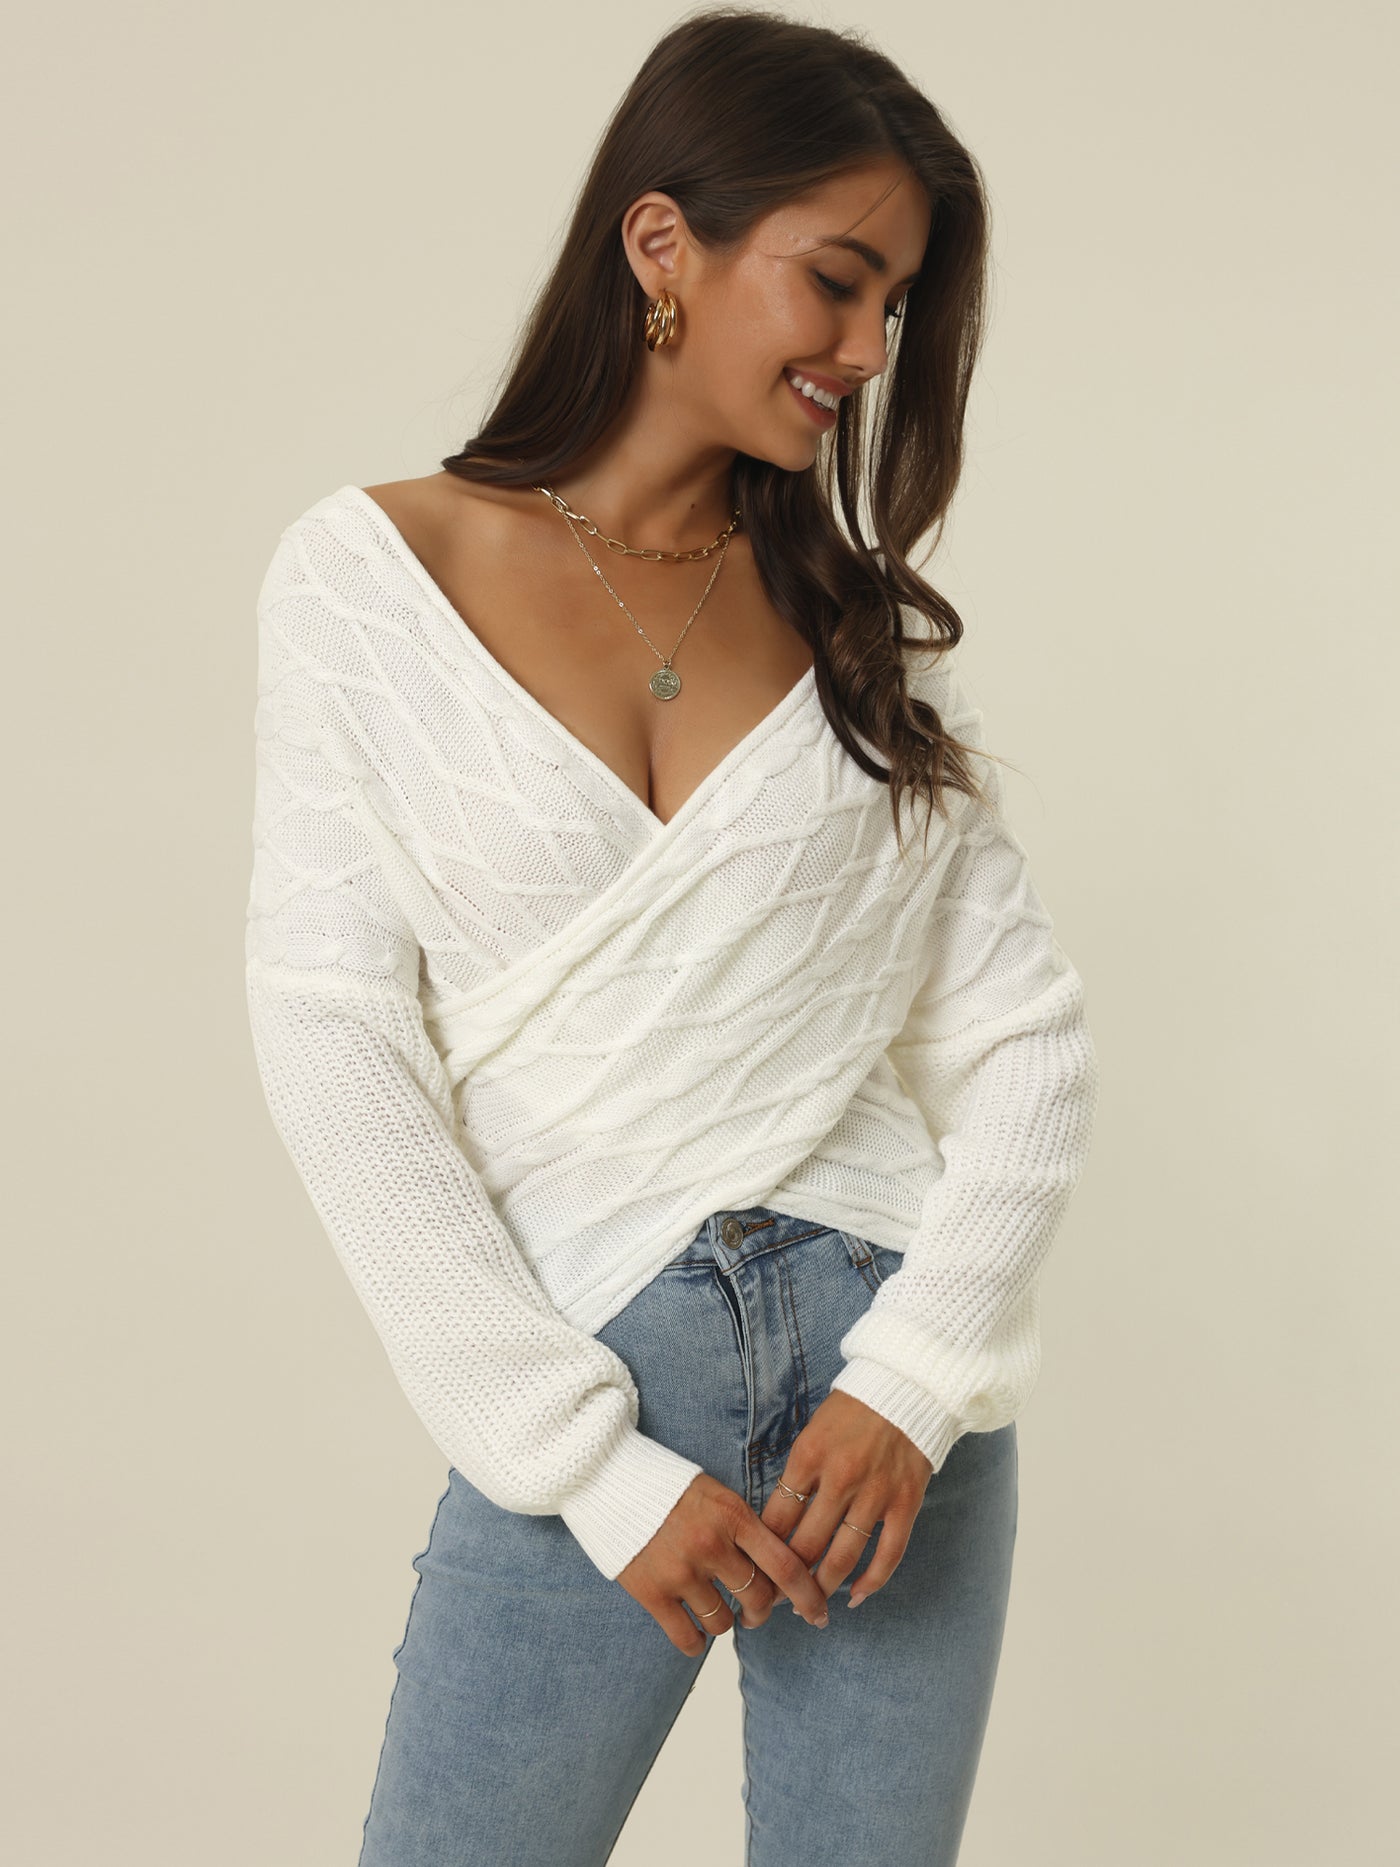 Bublédon Women's 2023 Fall Winter Casual Long Sleeve V Neck Cross Wrap Front Off Shoulder Asymmetric Hem Cable Knitted Crop Pullover Sweater